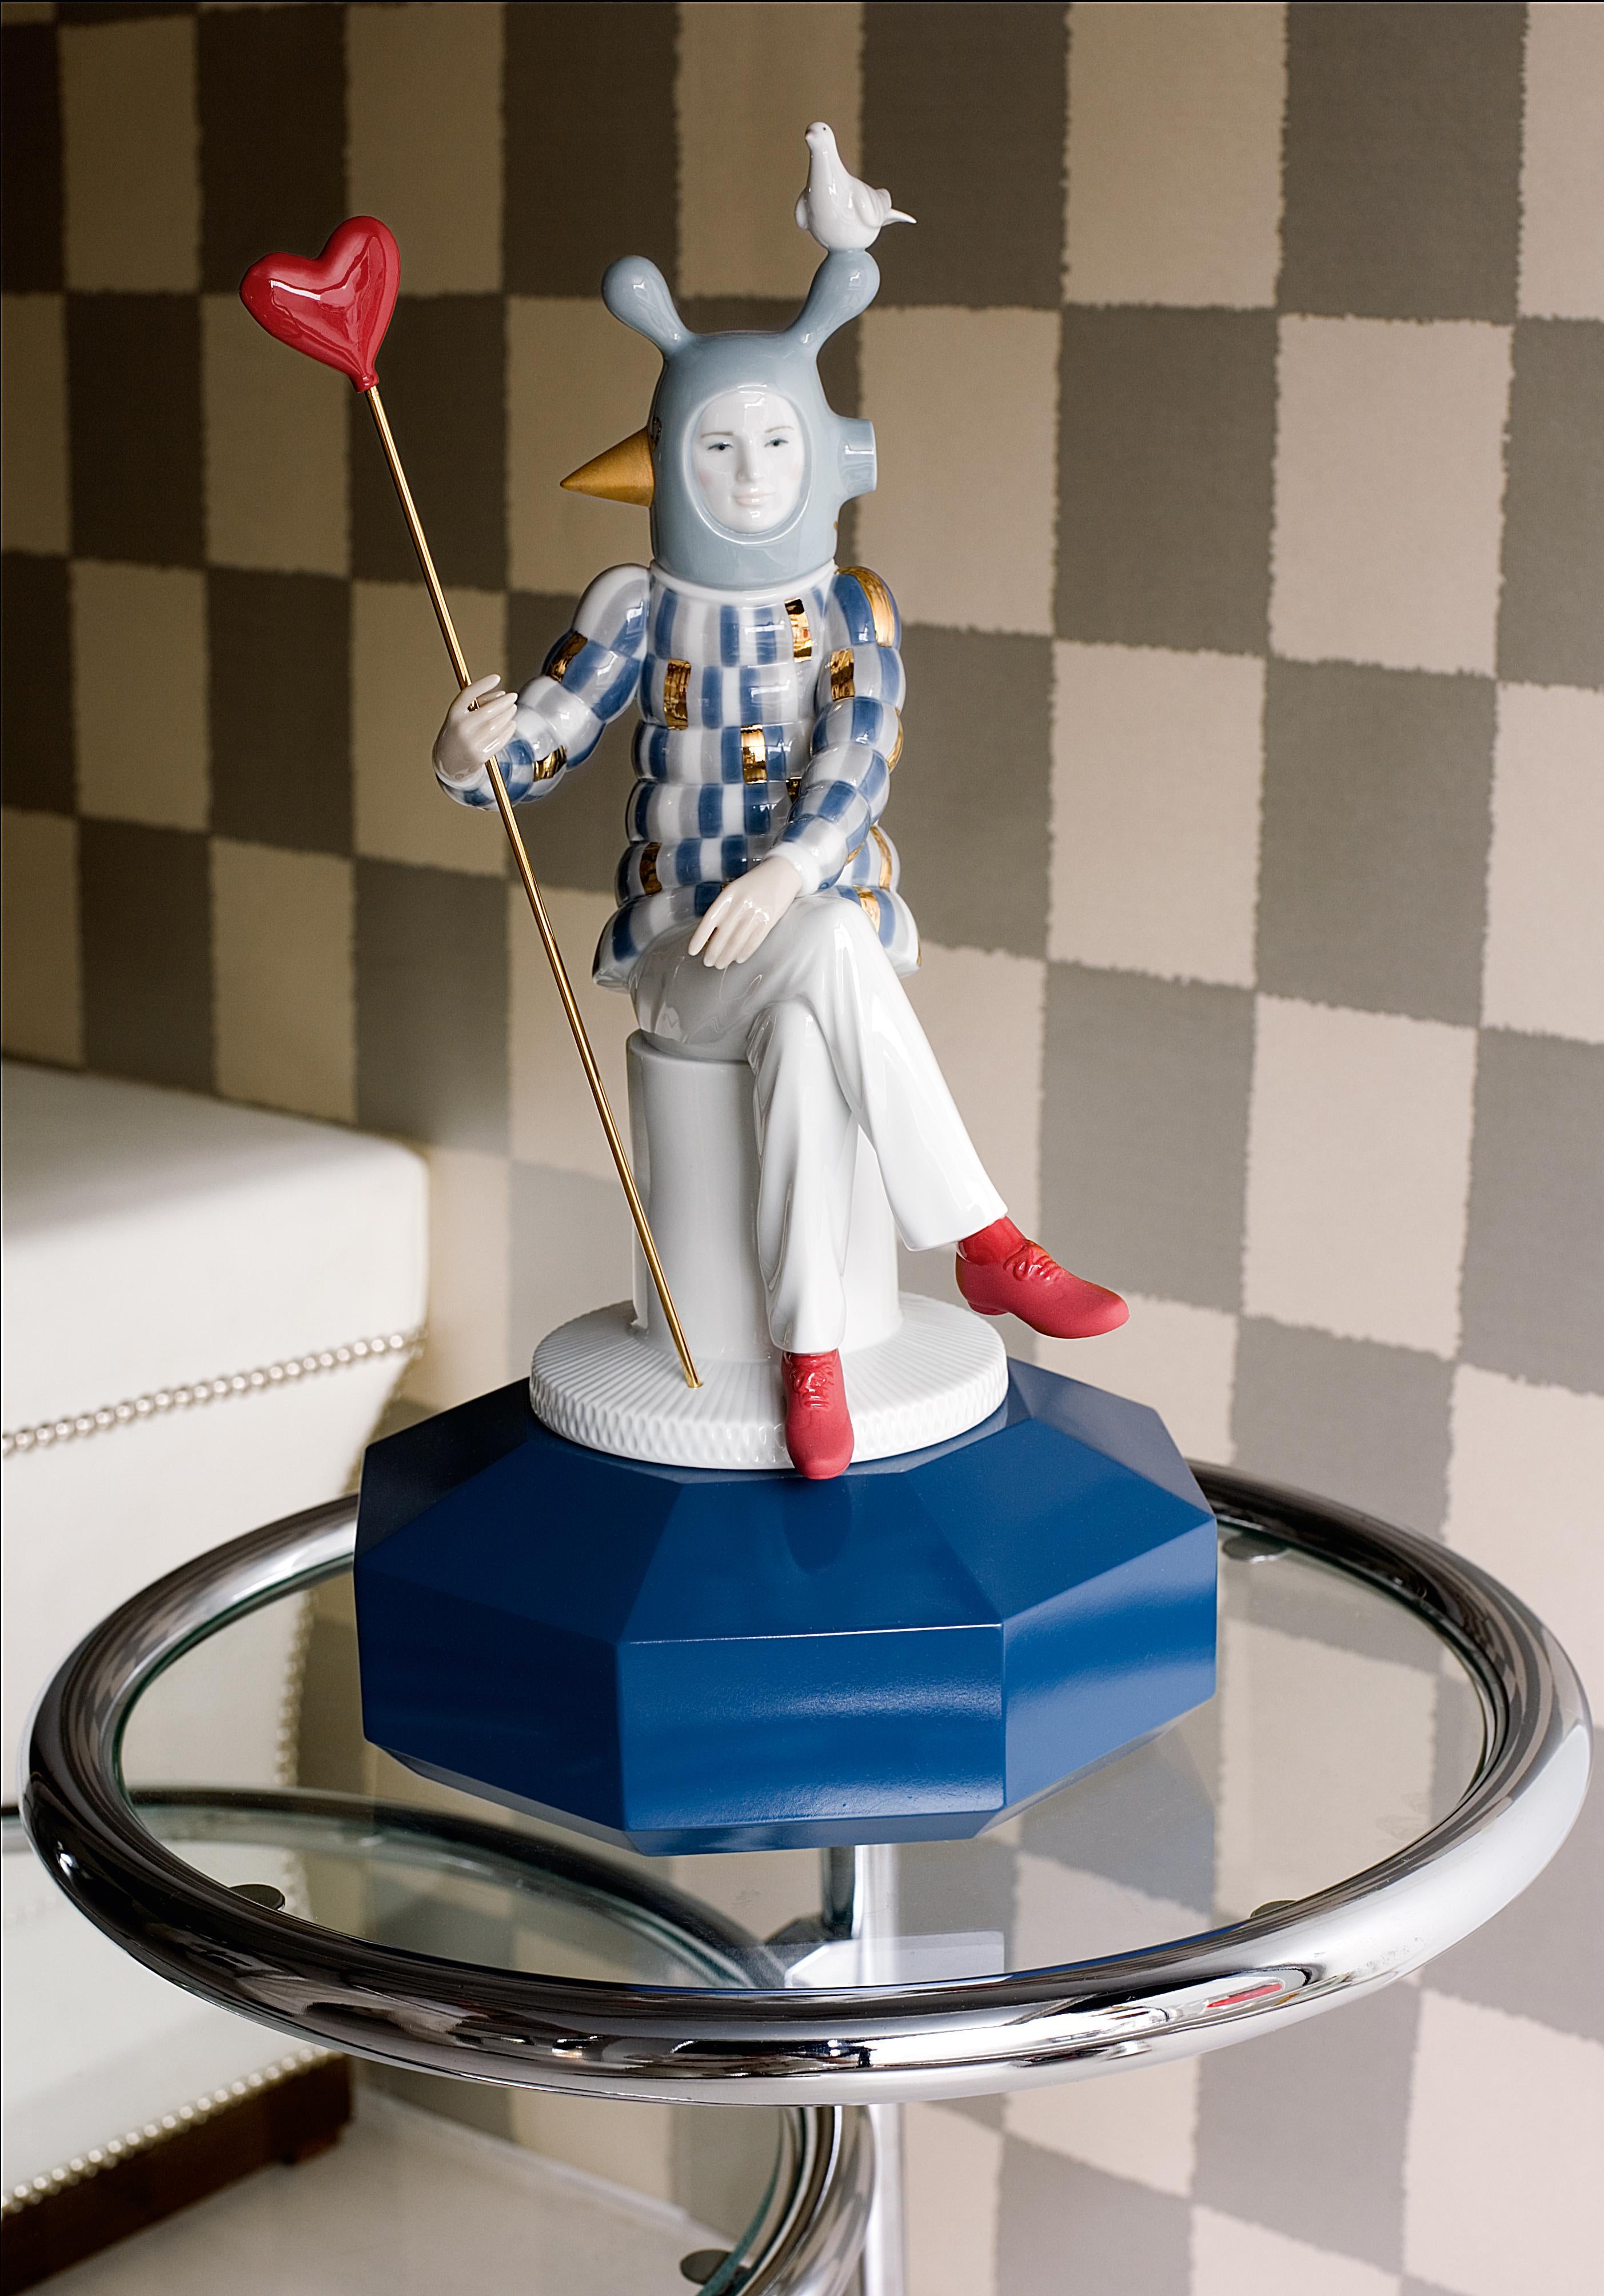 Glossy porcelain figurine designed by Jaime Hayon with modern design and touches of gilded sheen highlighting the red heart and shoes and blue pedestal. Like all the pieces in Jaime Hayon's The Fantasy collection, this creation arises from the